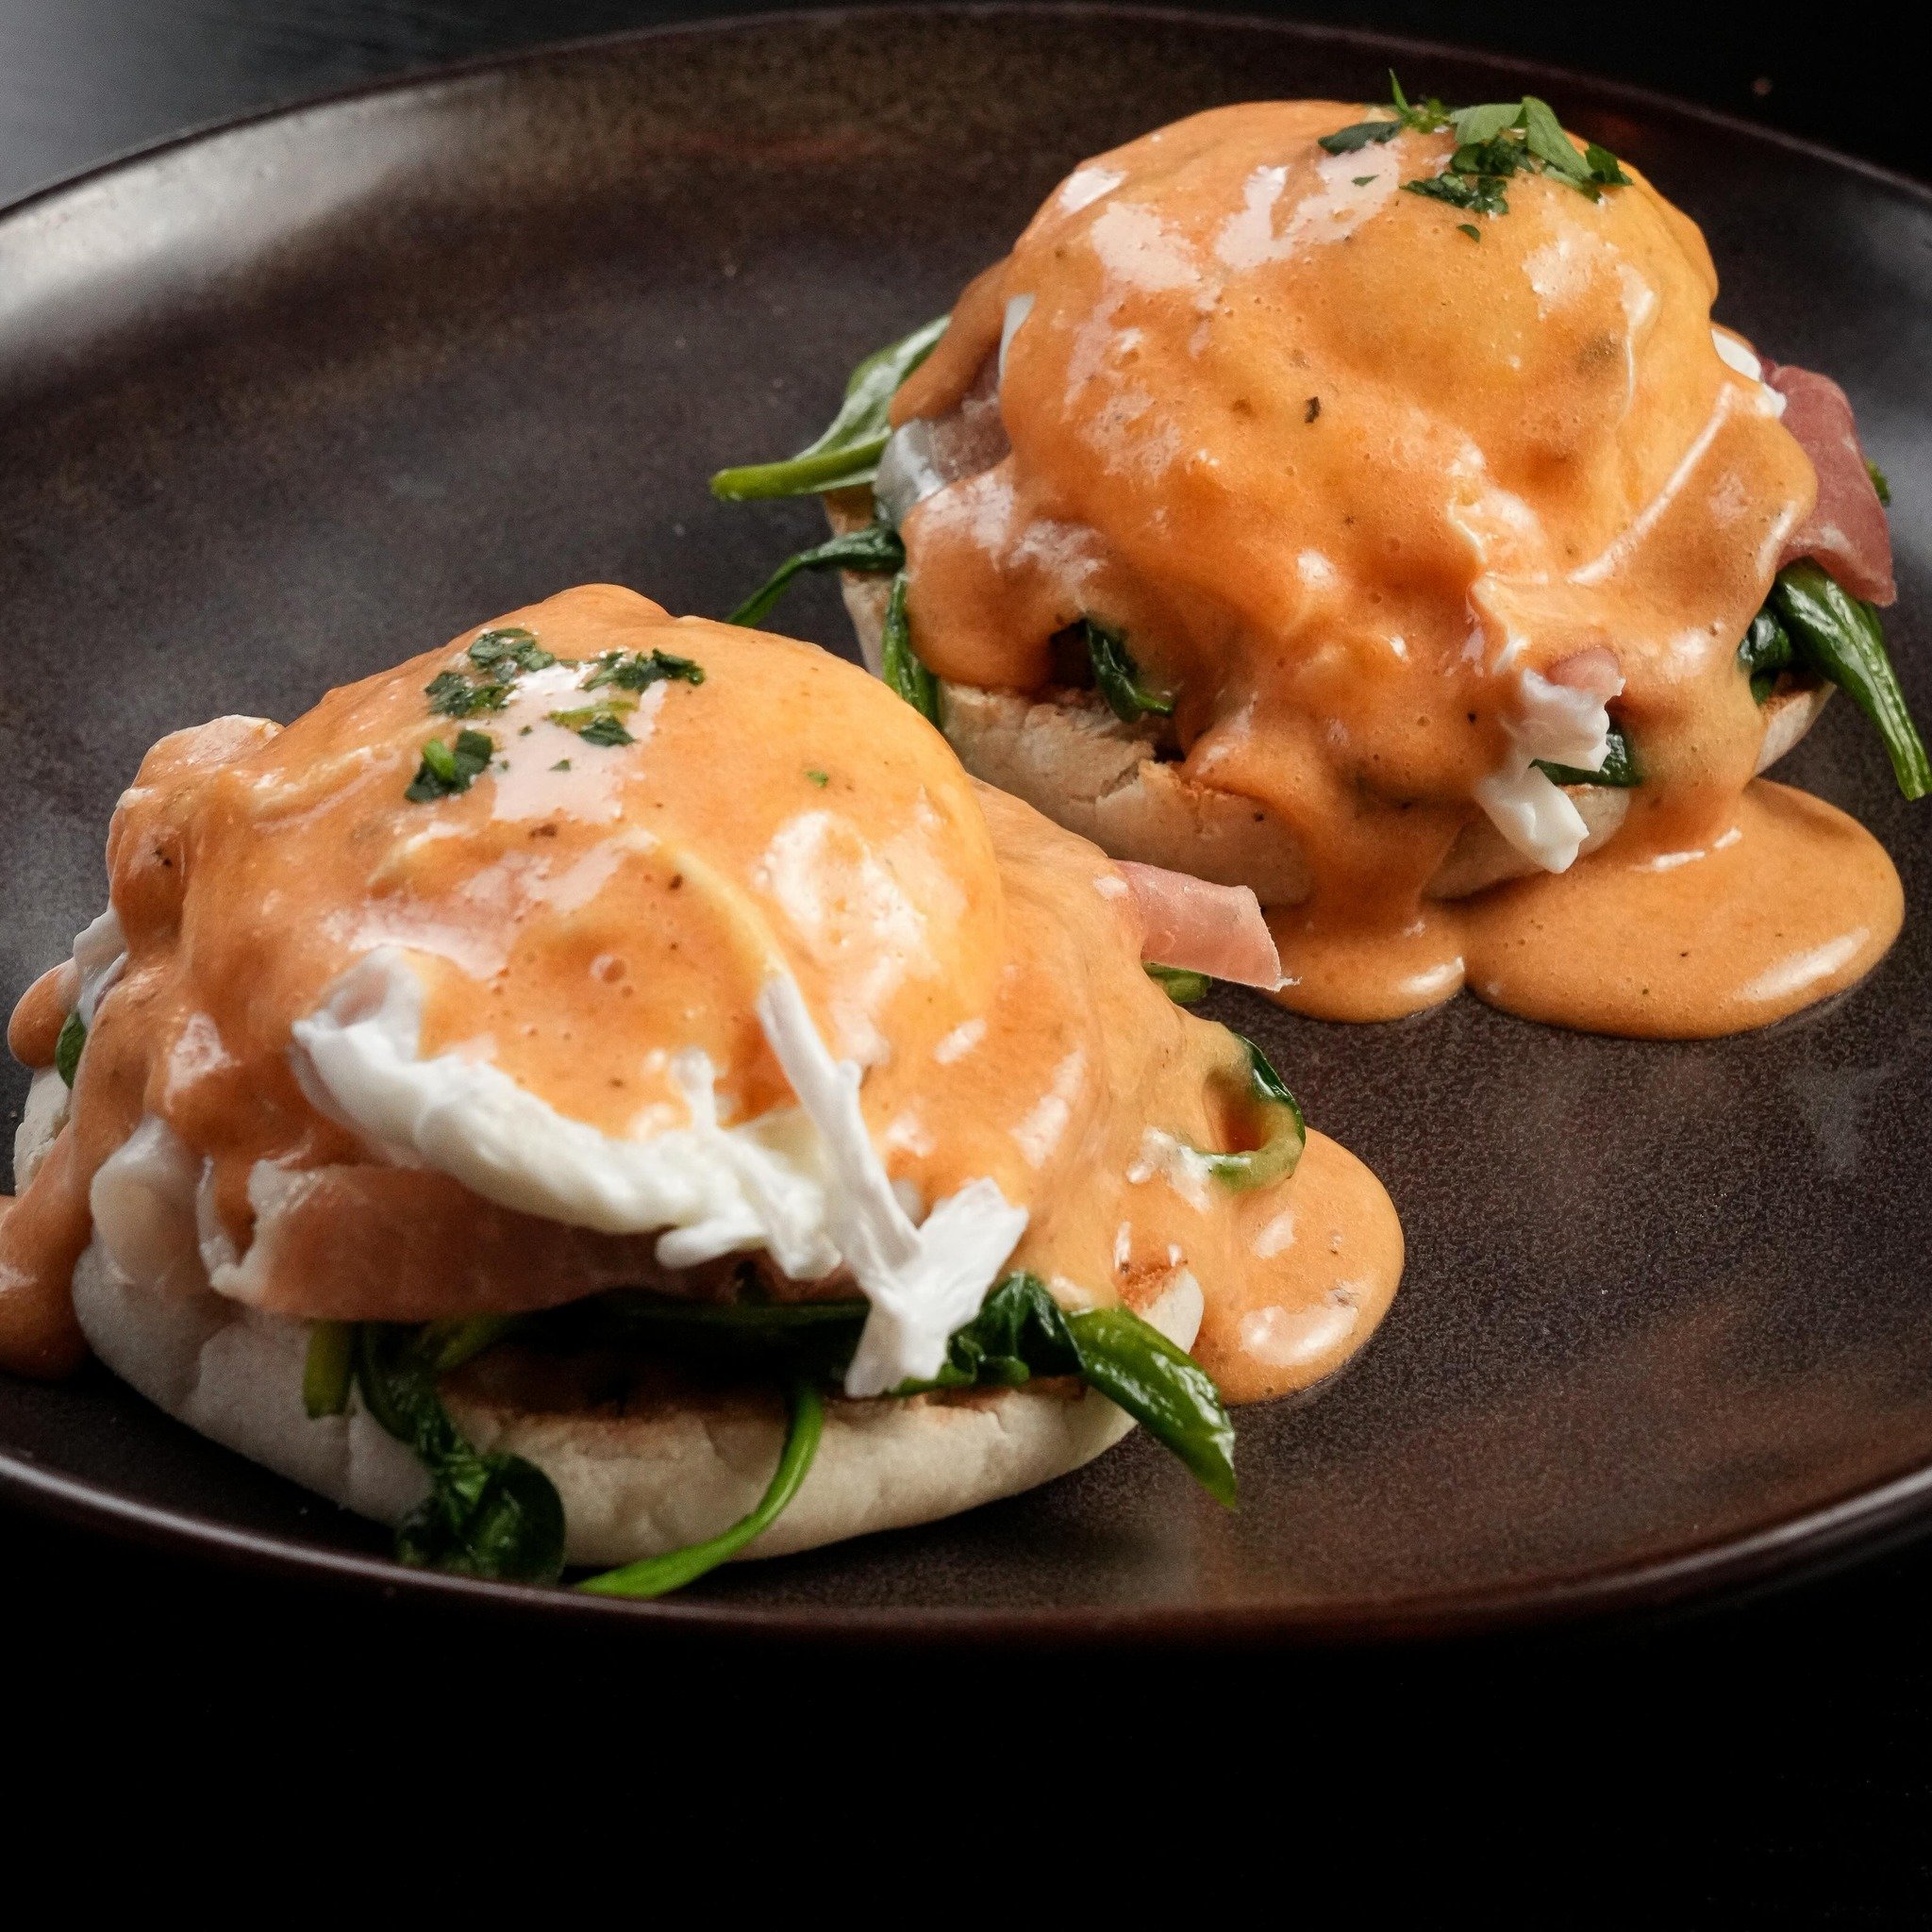 Is it Sunday Funday yet?? Craving the Locale Benedict at our Sunday Brunch!!!